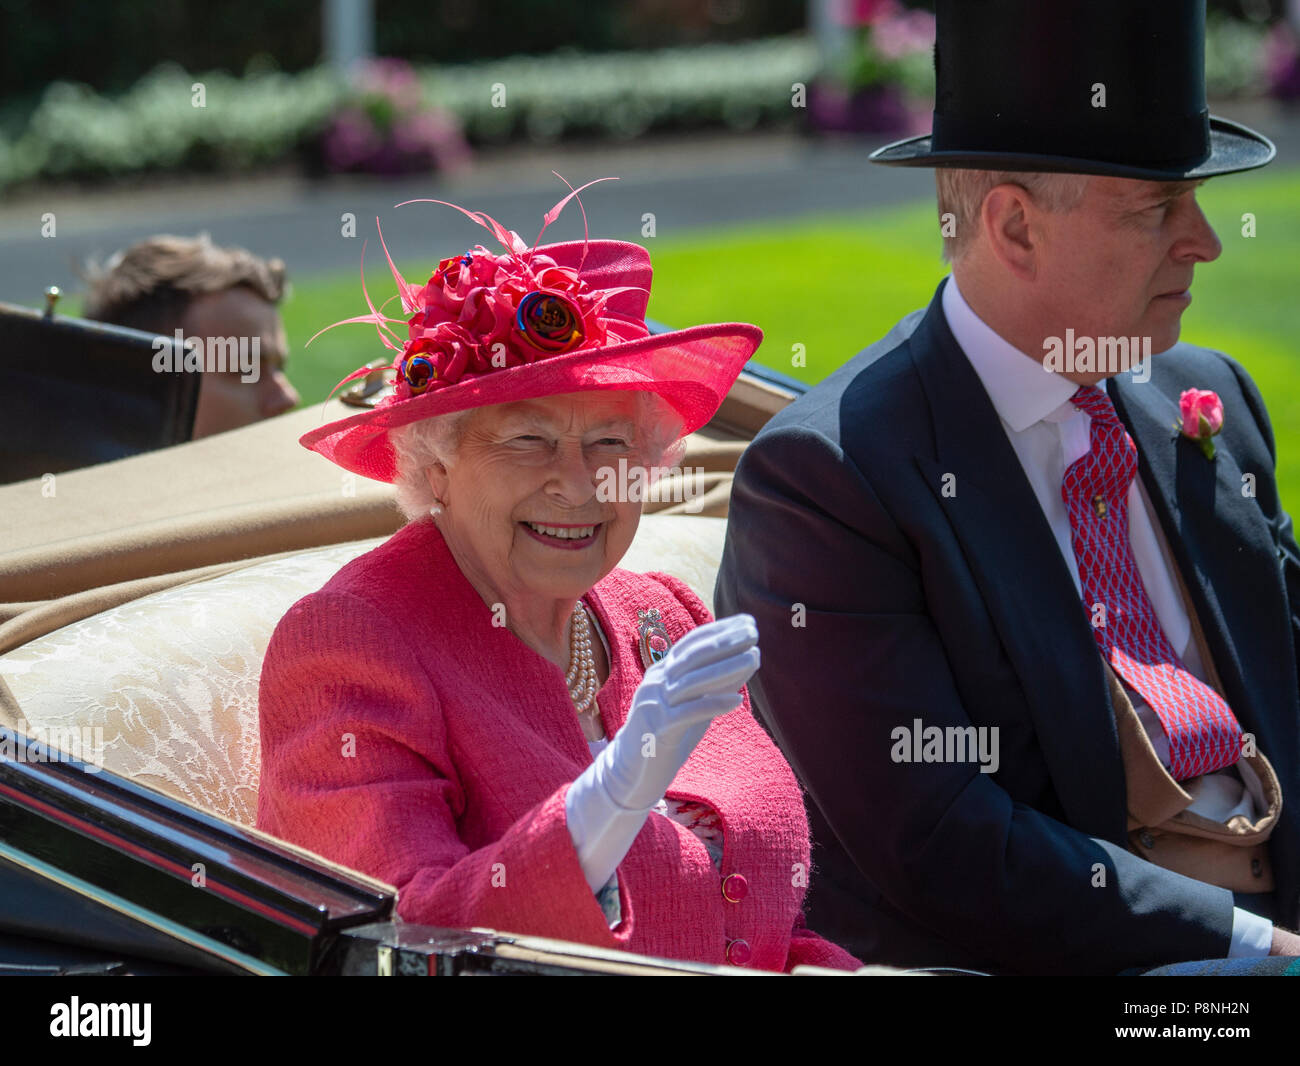 Her Majesty The Queen arriving for Ladies Day at Royal Ascot. Stock Photo